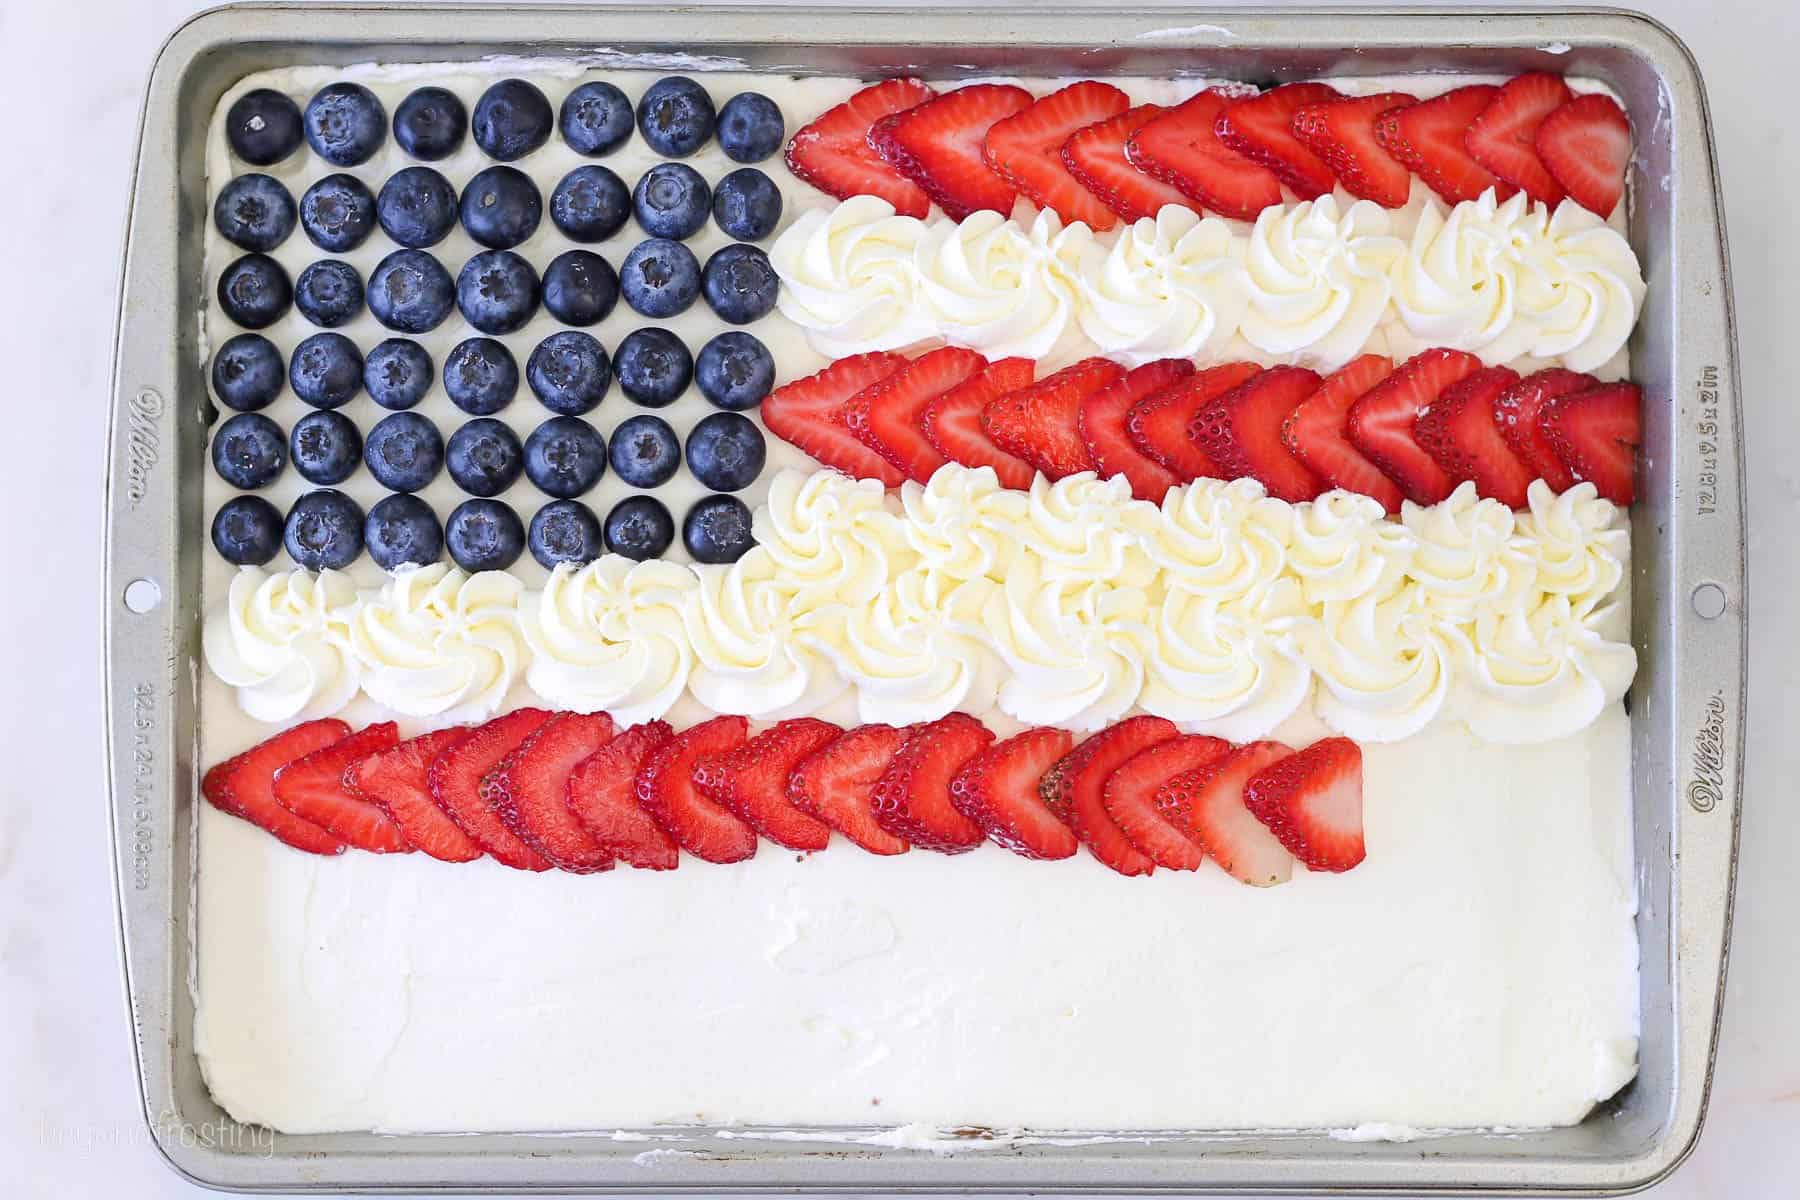 Step by step photo for decorating a flag cake with strawberries and blueberries